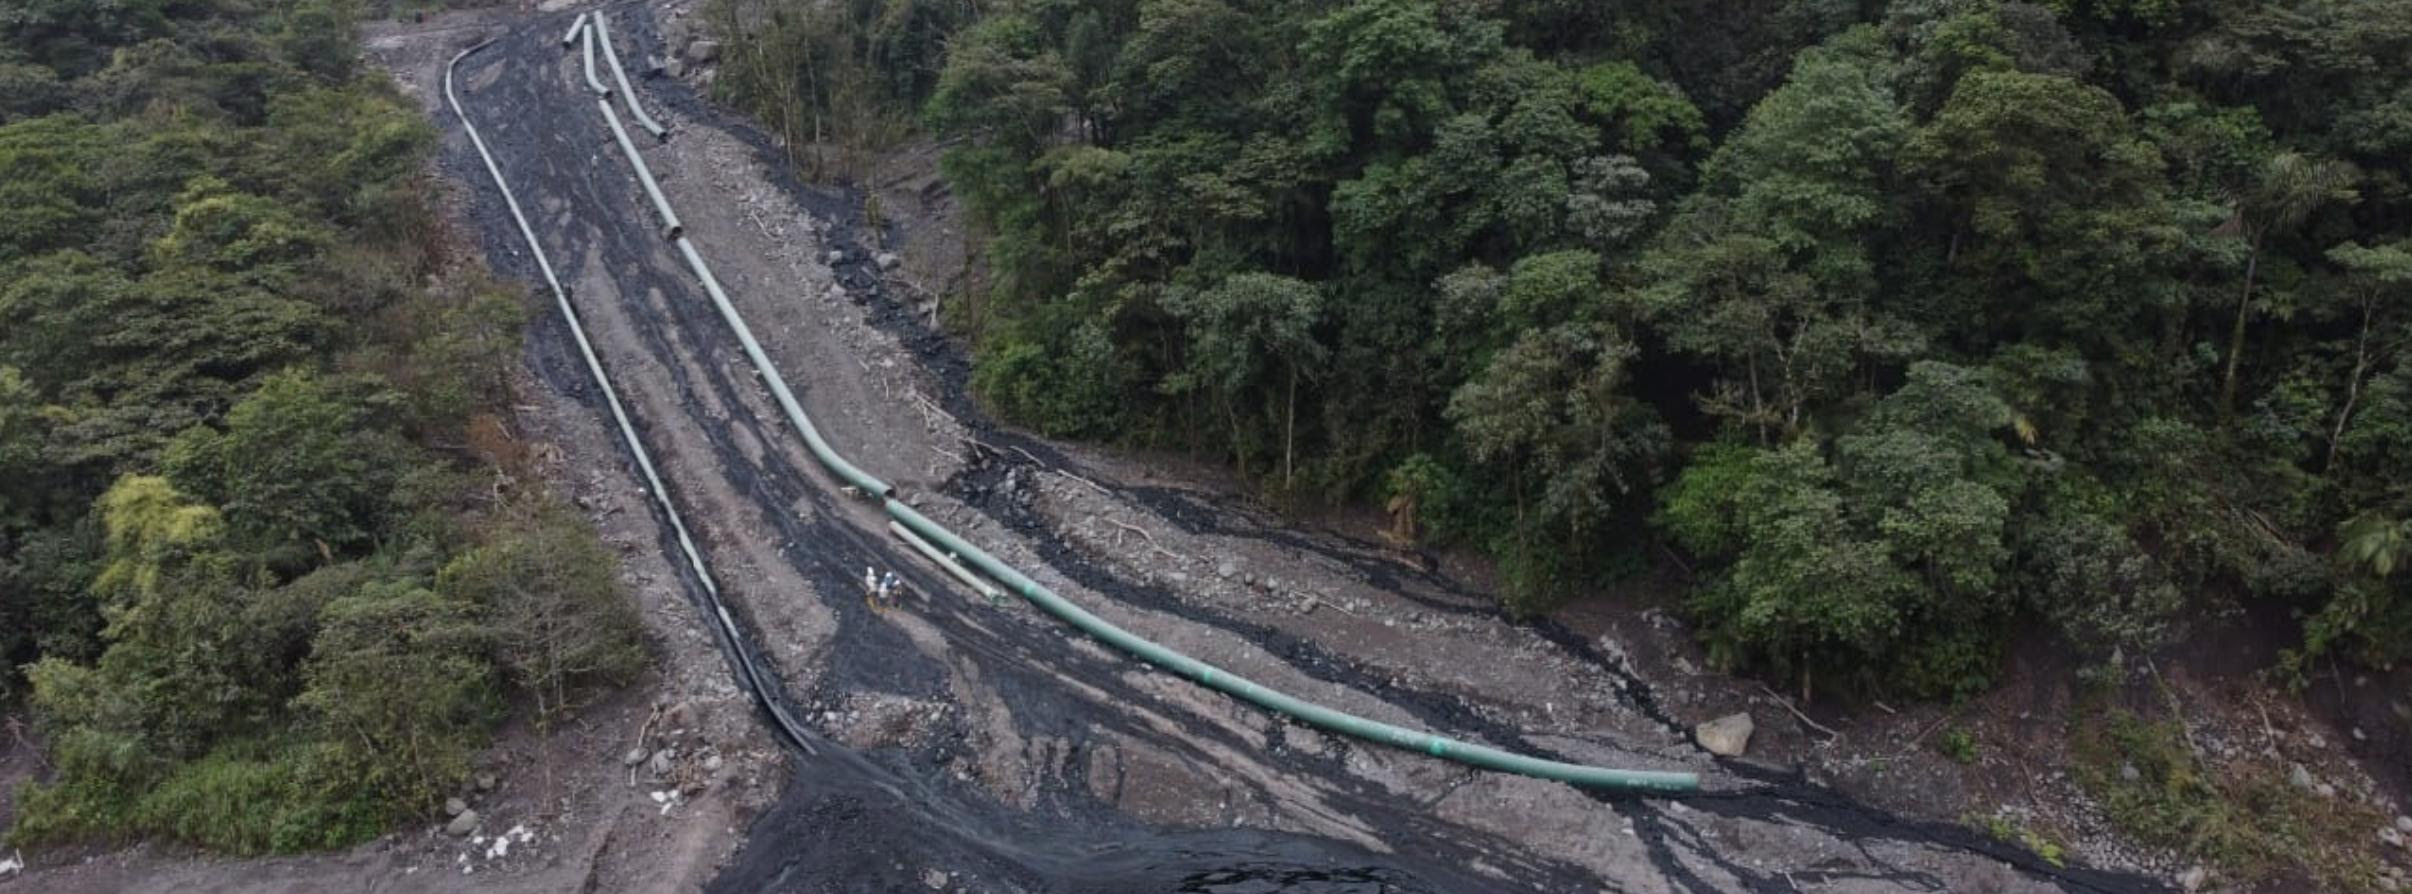 image of ruptured crude oil pipeline and oil spill in Ecuador, Amazon